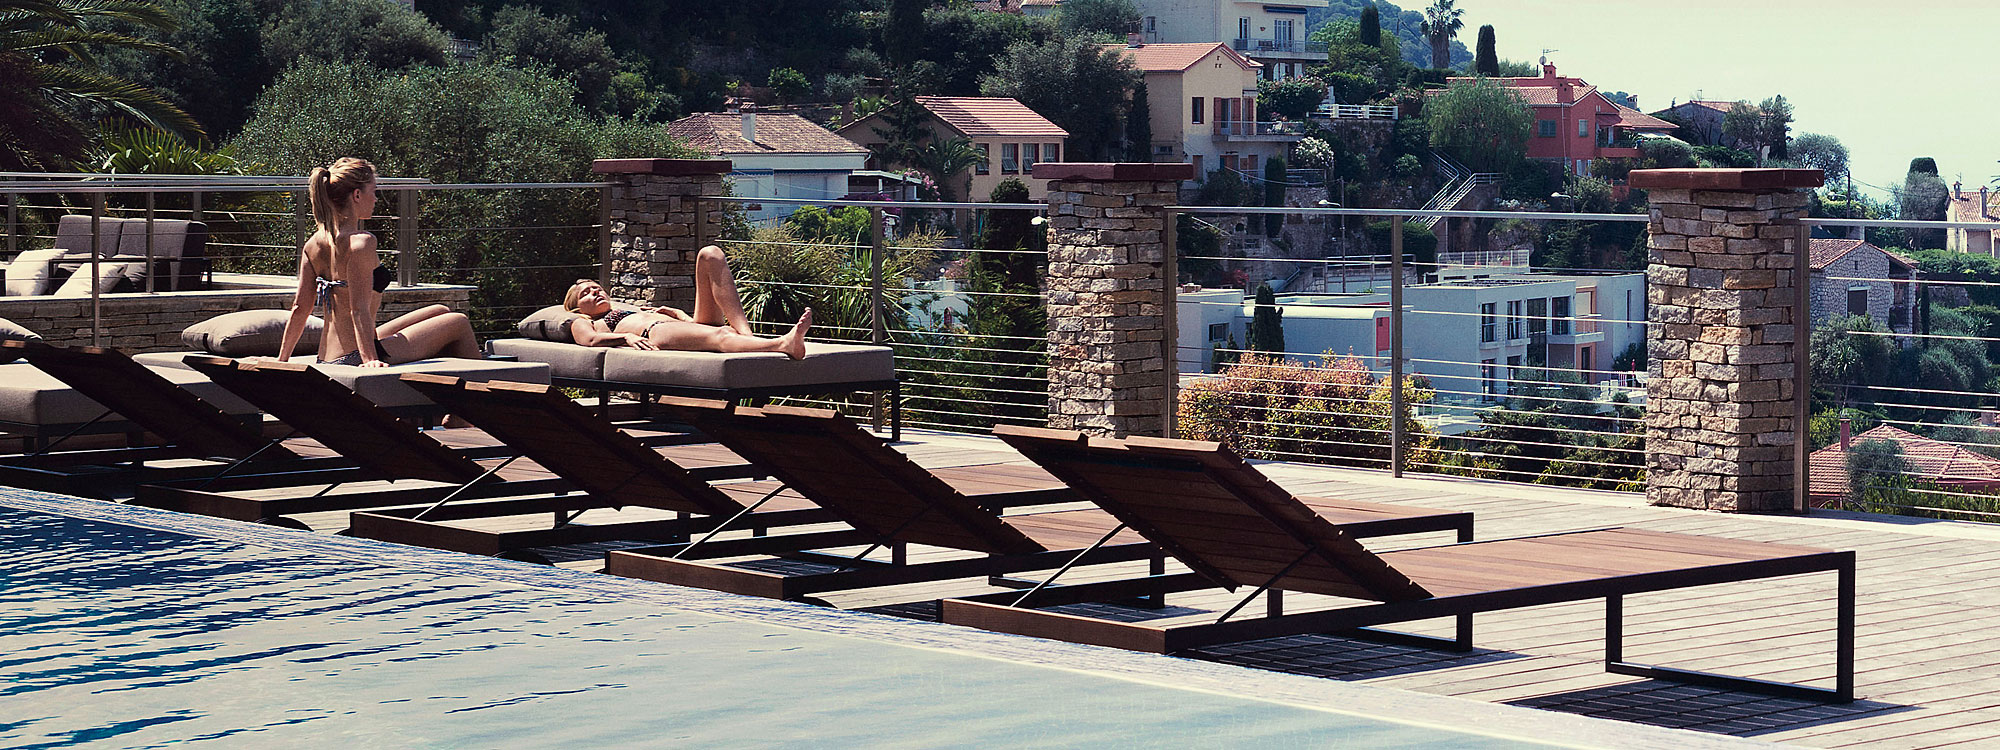 Image of row of Roshults Garden Loungers on poolside next to 2 women relaxing on Garden Easy daybeds, with hillside dotted with villas in the background